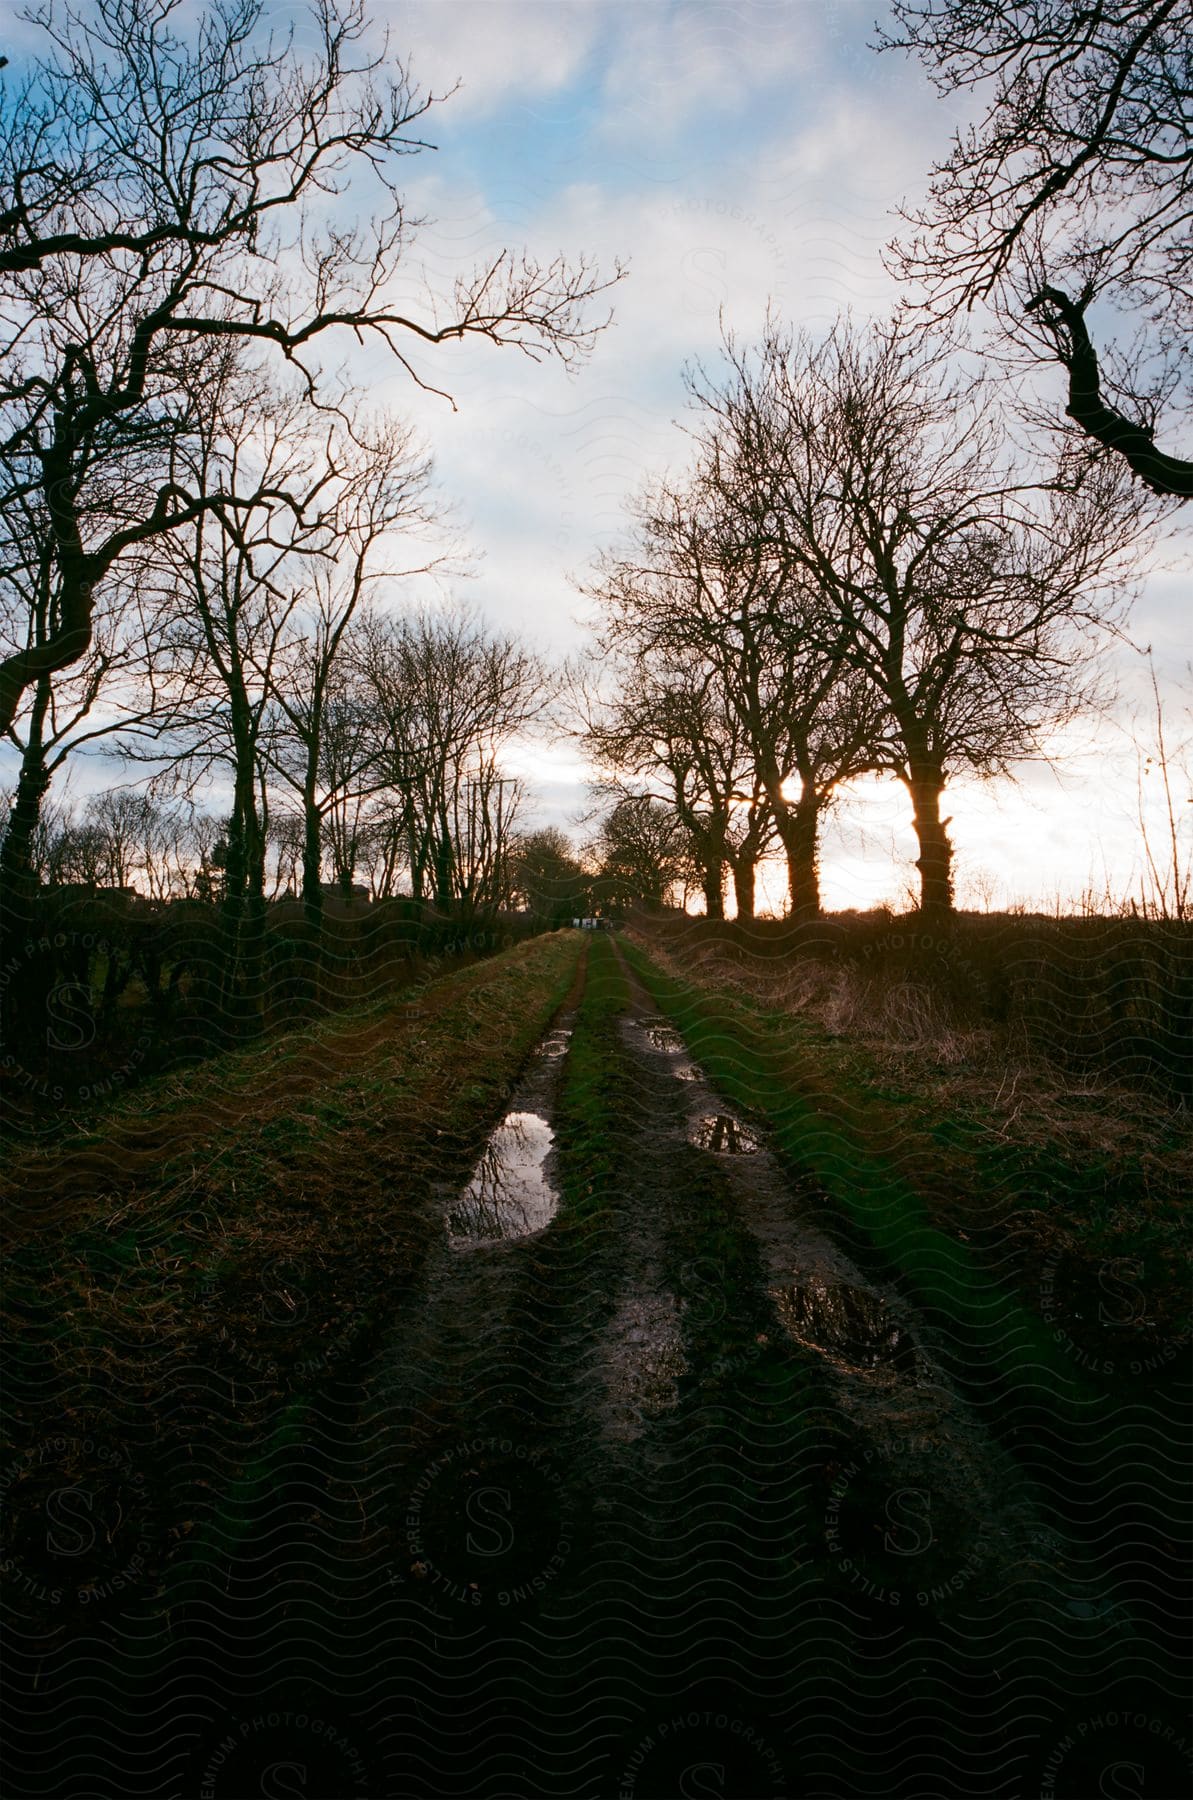 Rural road with water puddles in tire tracks lined with bare trees as sunlight shines through clouds